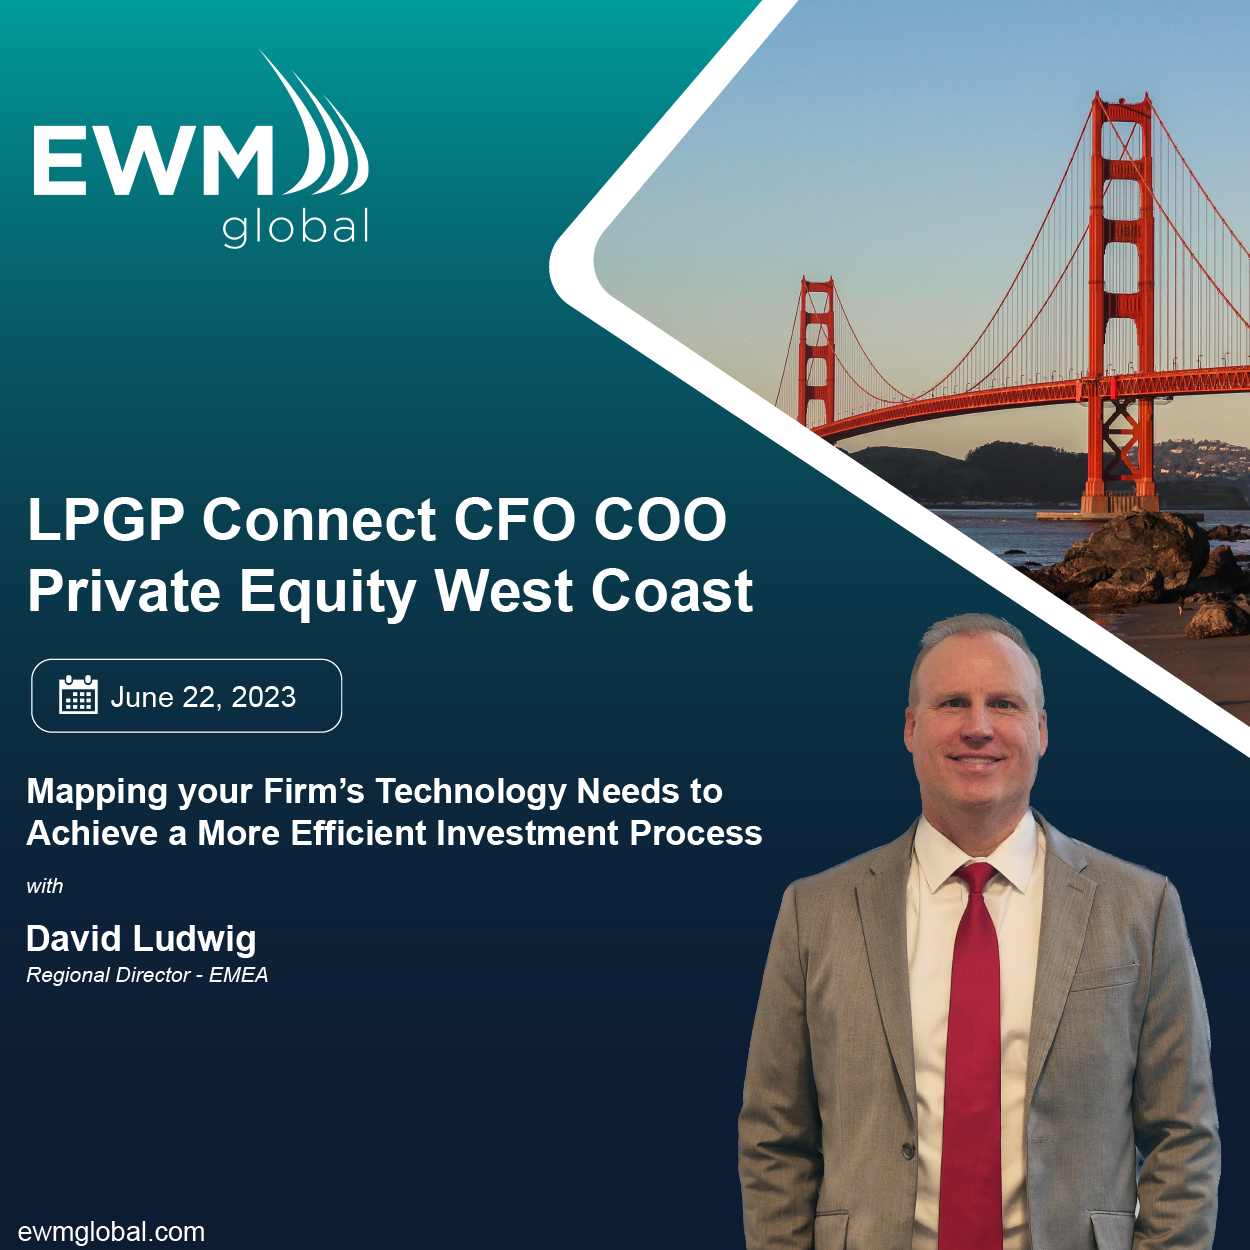 EWM Global to Sponsor LPGP Connect CFO COO Private Equity West Coast 2023